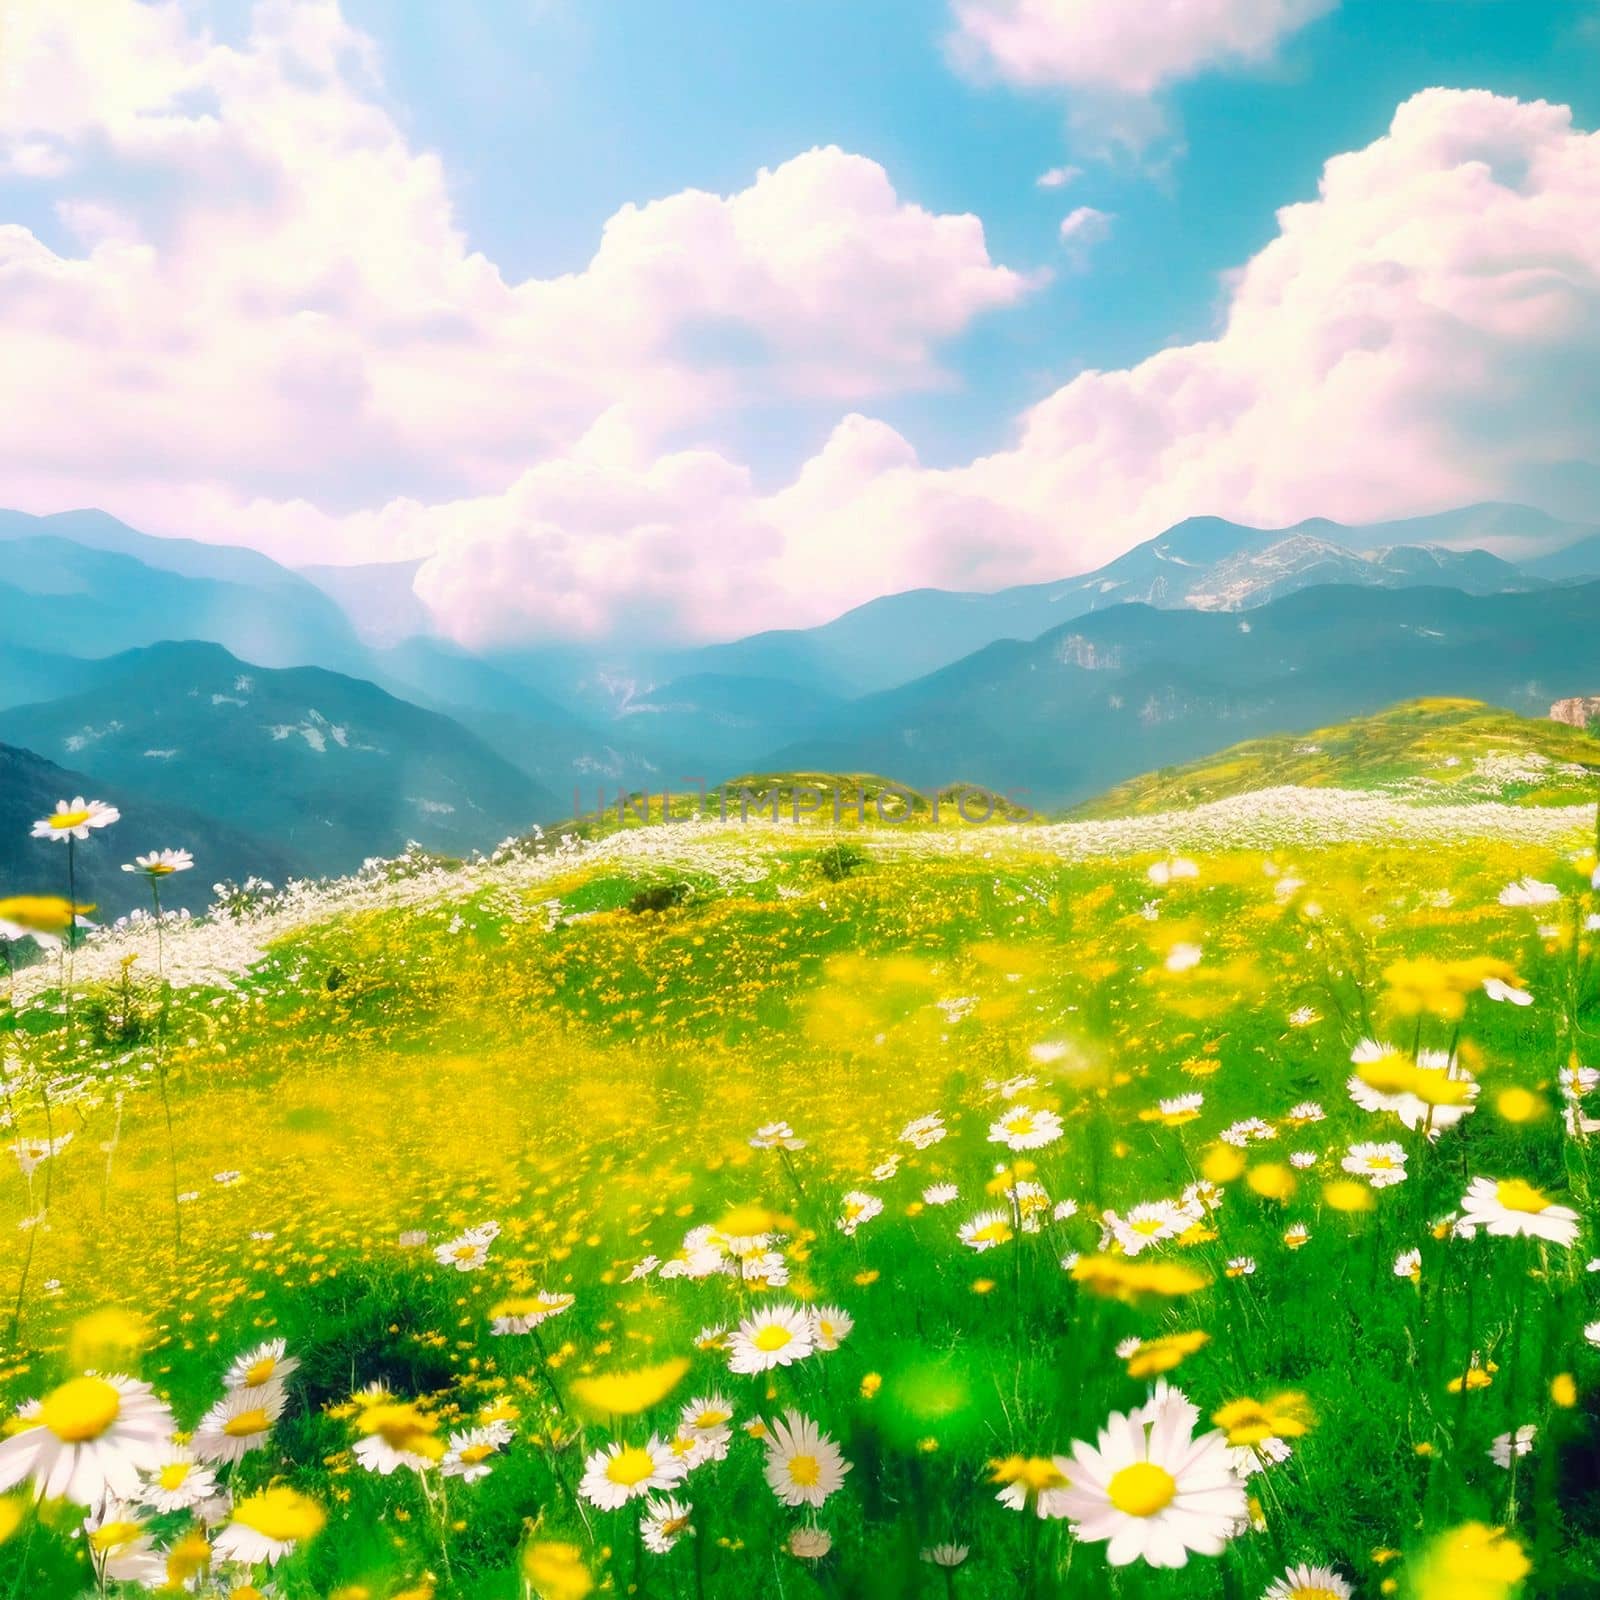 Chamomile field in the mountains. High quality illustration